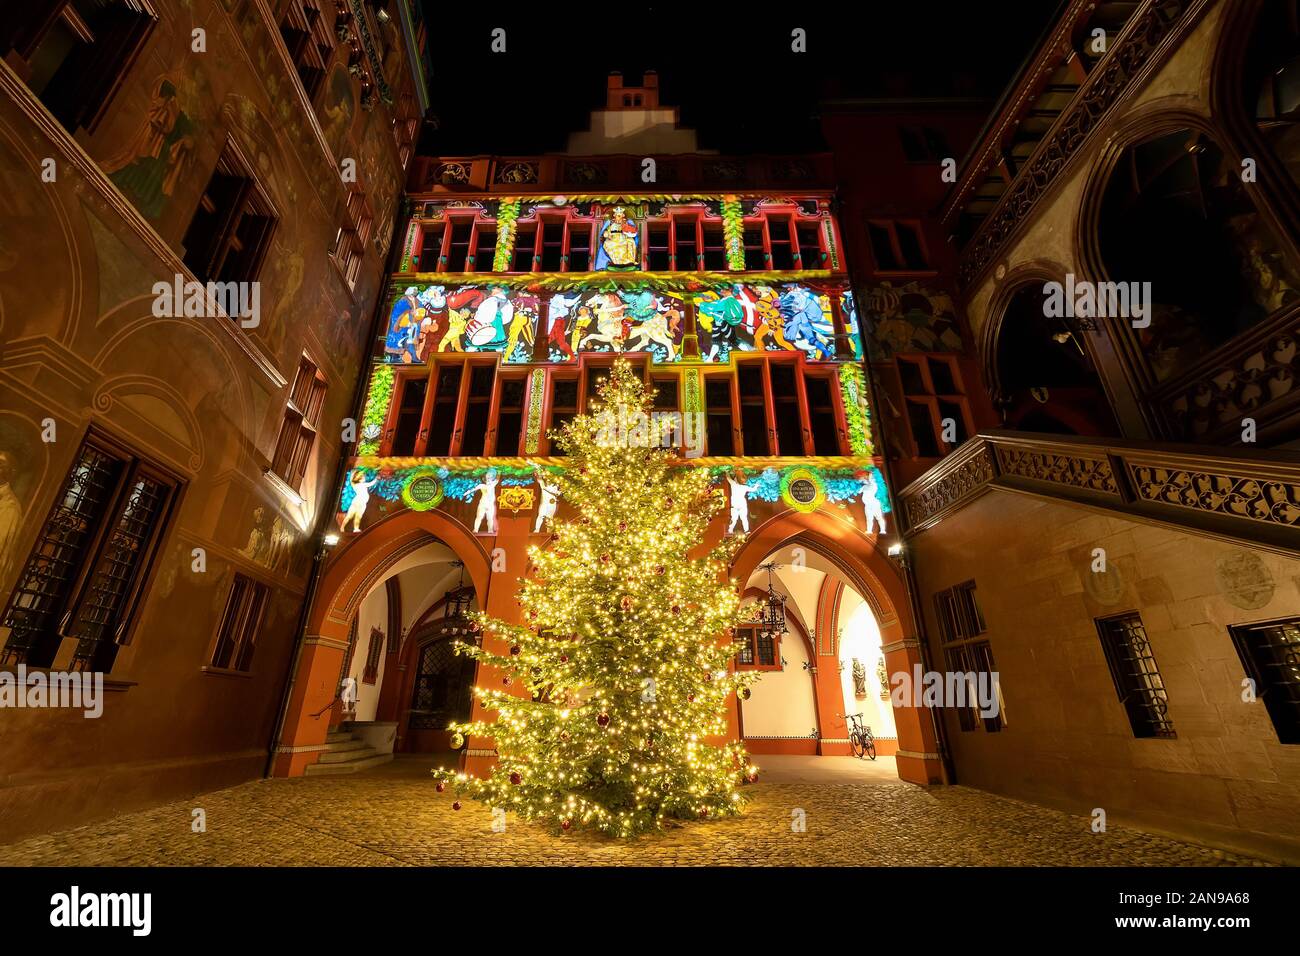 Basel, Swizerland - December 3,2019: Christmas tree at town hall of Basel, a five hundred years old building dominating the Marktplatz in Basel, Switz Stock Photo